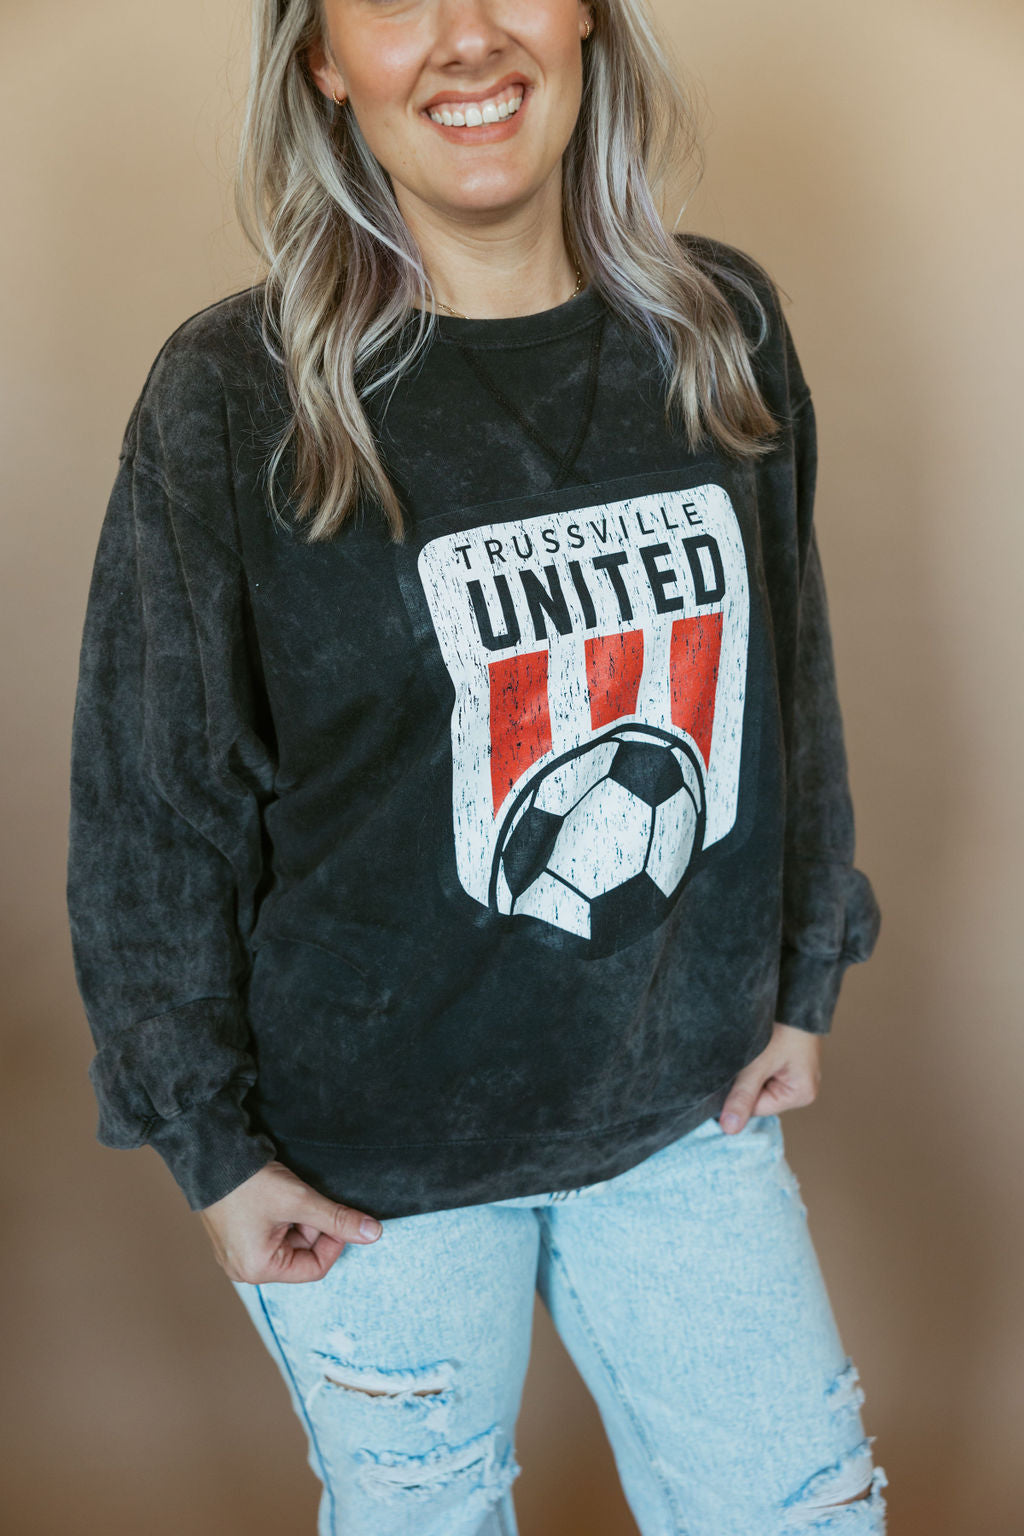 Trussville United Distressed | Adult Mineral Wash Pullover-Adult Pullover-Sister Shirts-Sister Shirts, Cute & Custom Tees for Mama & Littles in Trussville, Alabama.